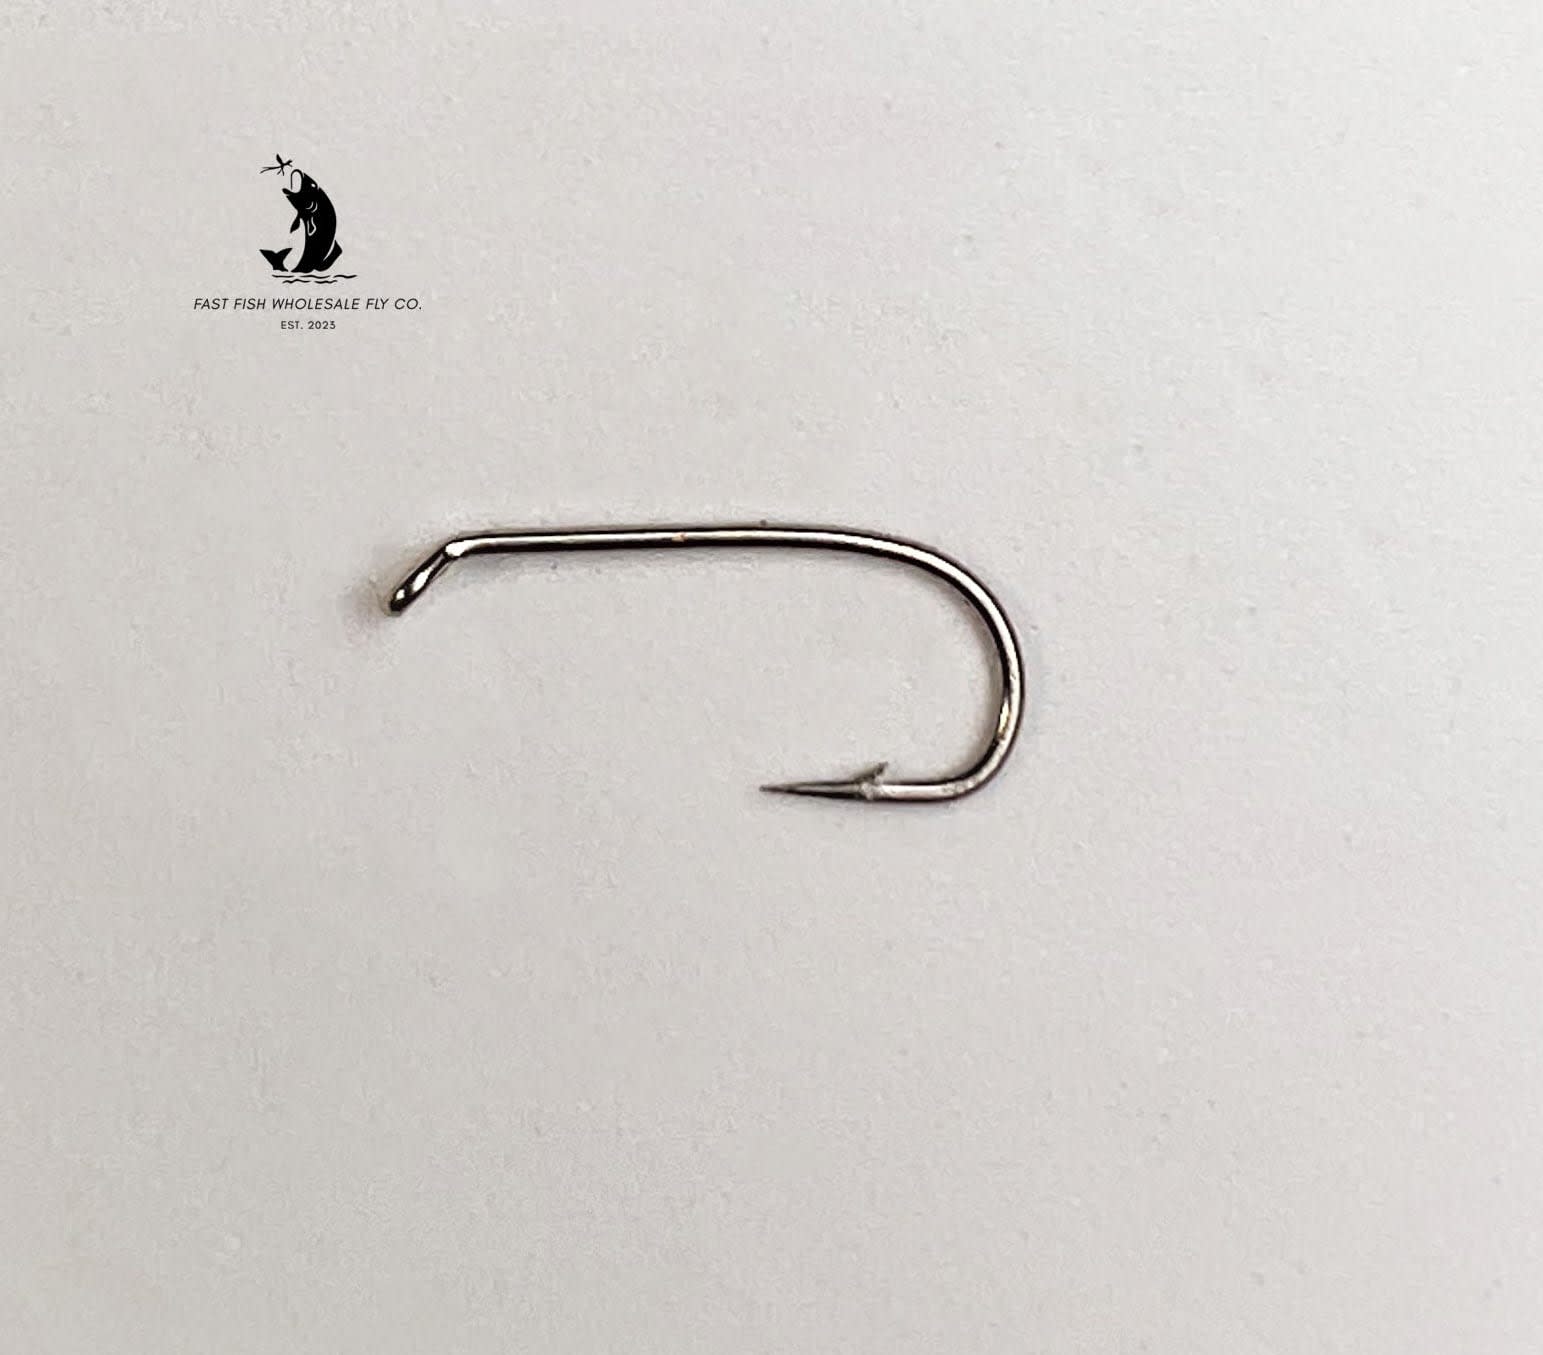 Fast Fish Wholesale Fly Company - Fly Tying Supplier